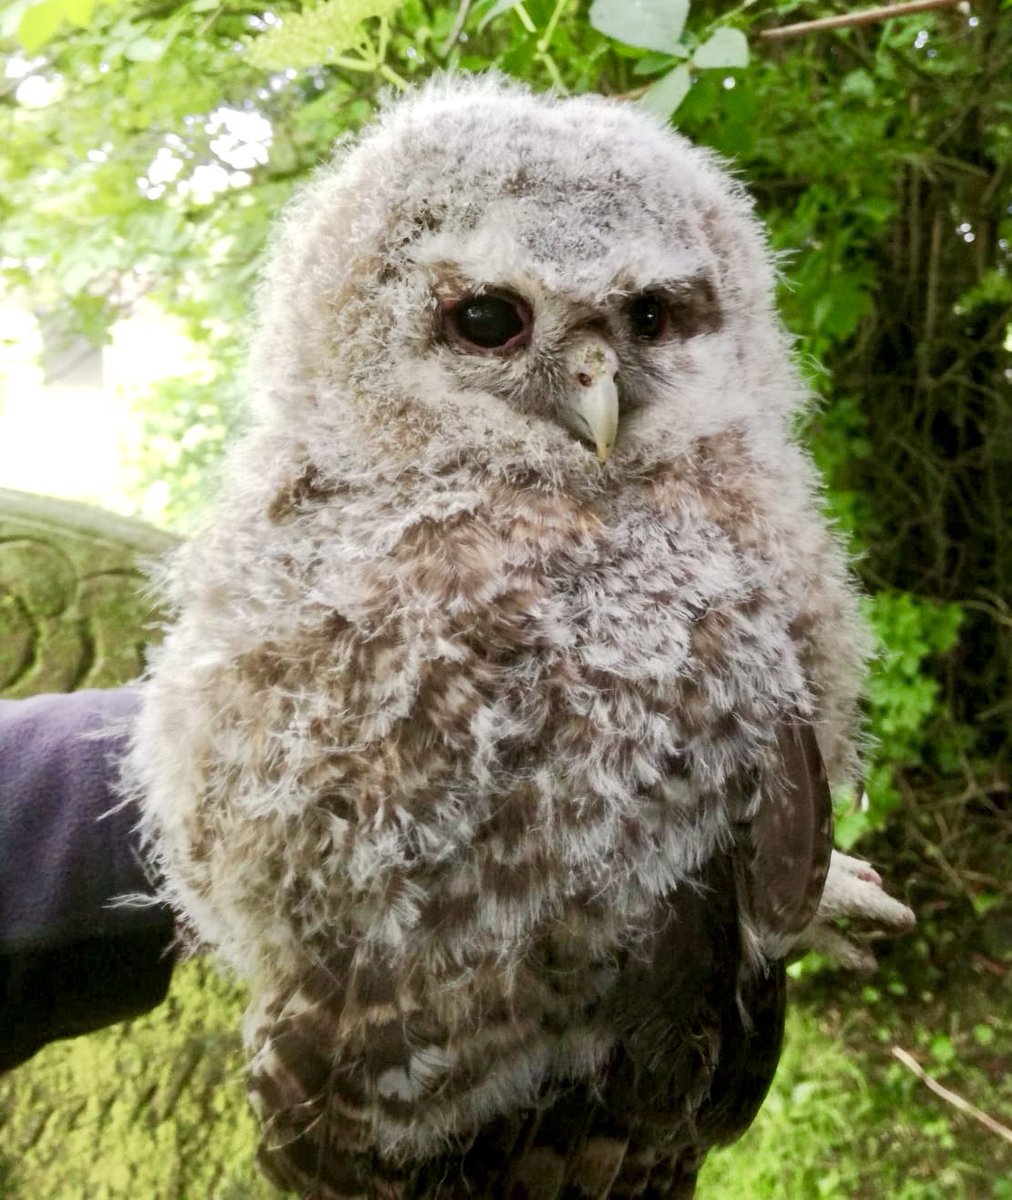 Yesterday in North Staffordshire a farmer who we work with contacted regarding a young Tawny Owl which was on a track and was worried it could get hurt. We arrived and placed it safely in a tree and not long after the parent bird came to feed it. Great result #opowl #farming